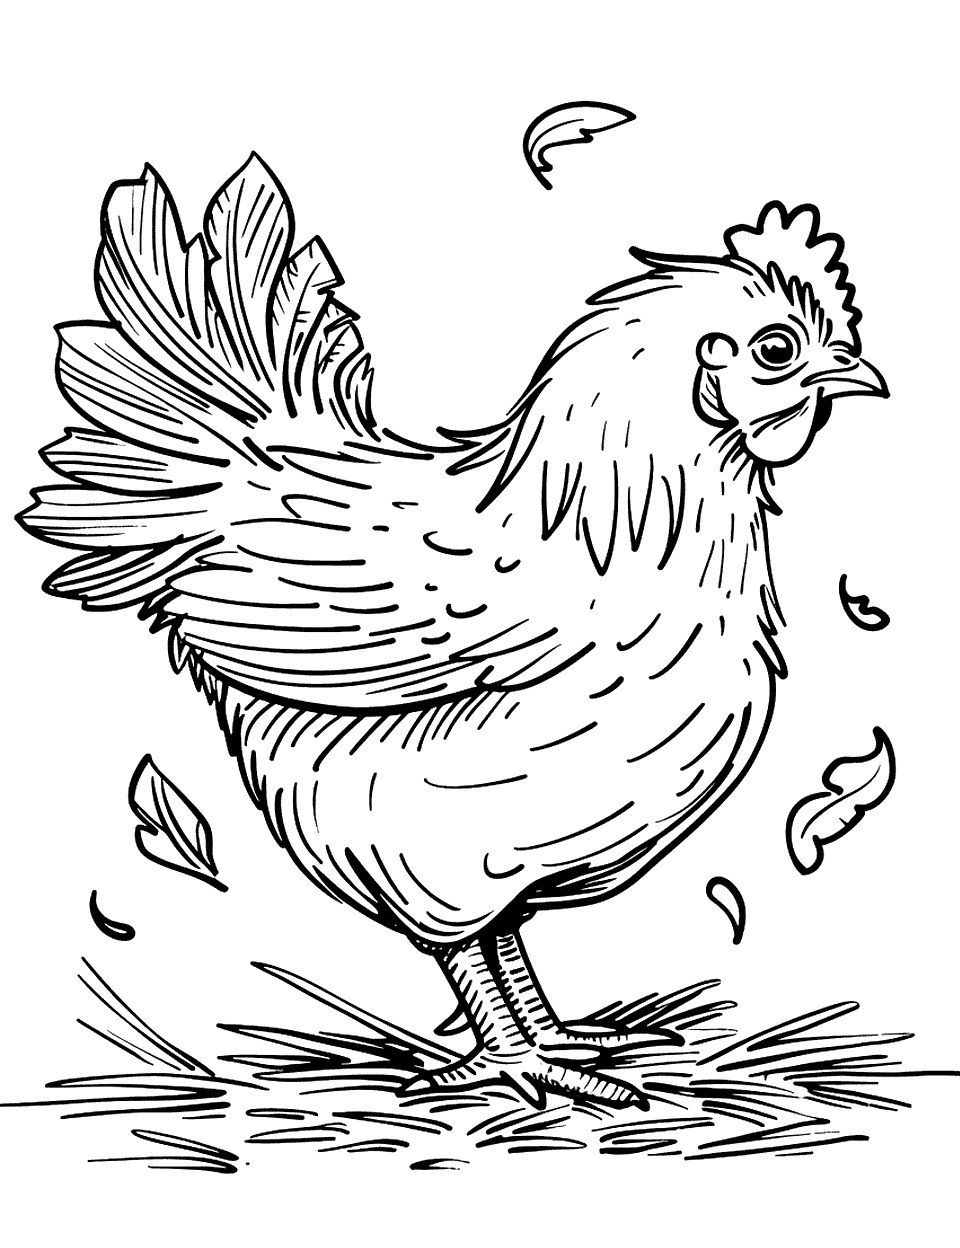 Pecking Chicken with Feathers Flying Coloring Page - A chicken pecking at the ground with some feathers fluttering in the air.